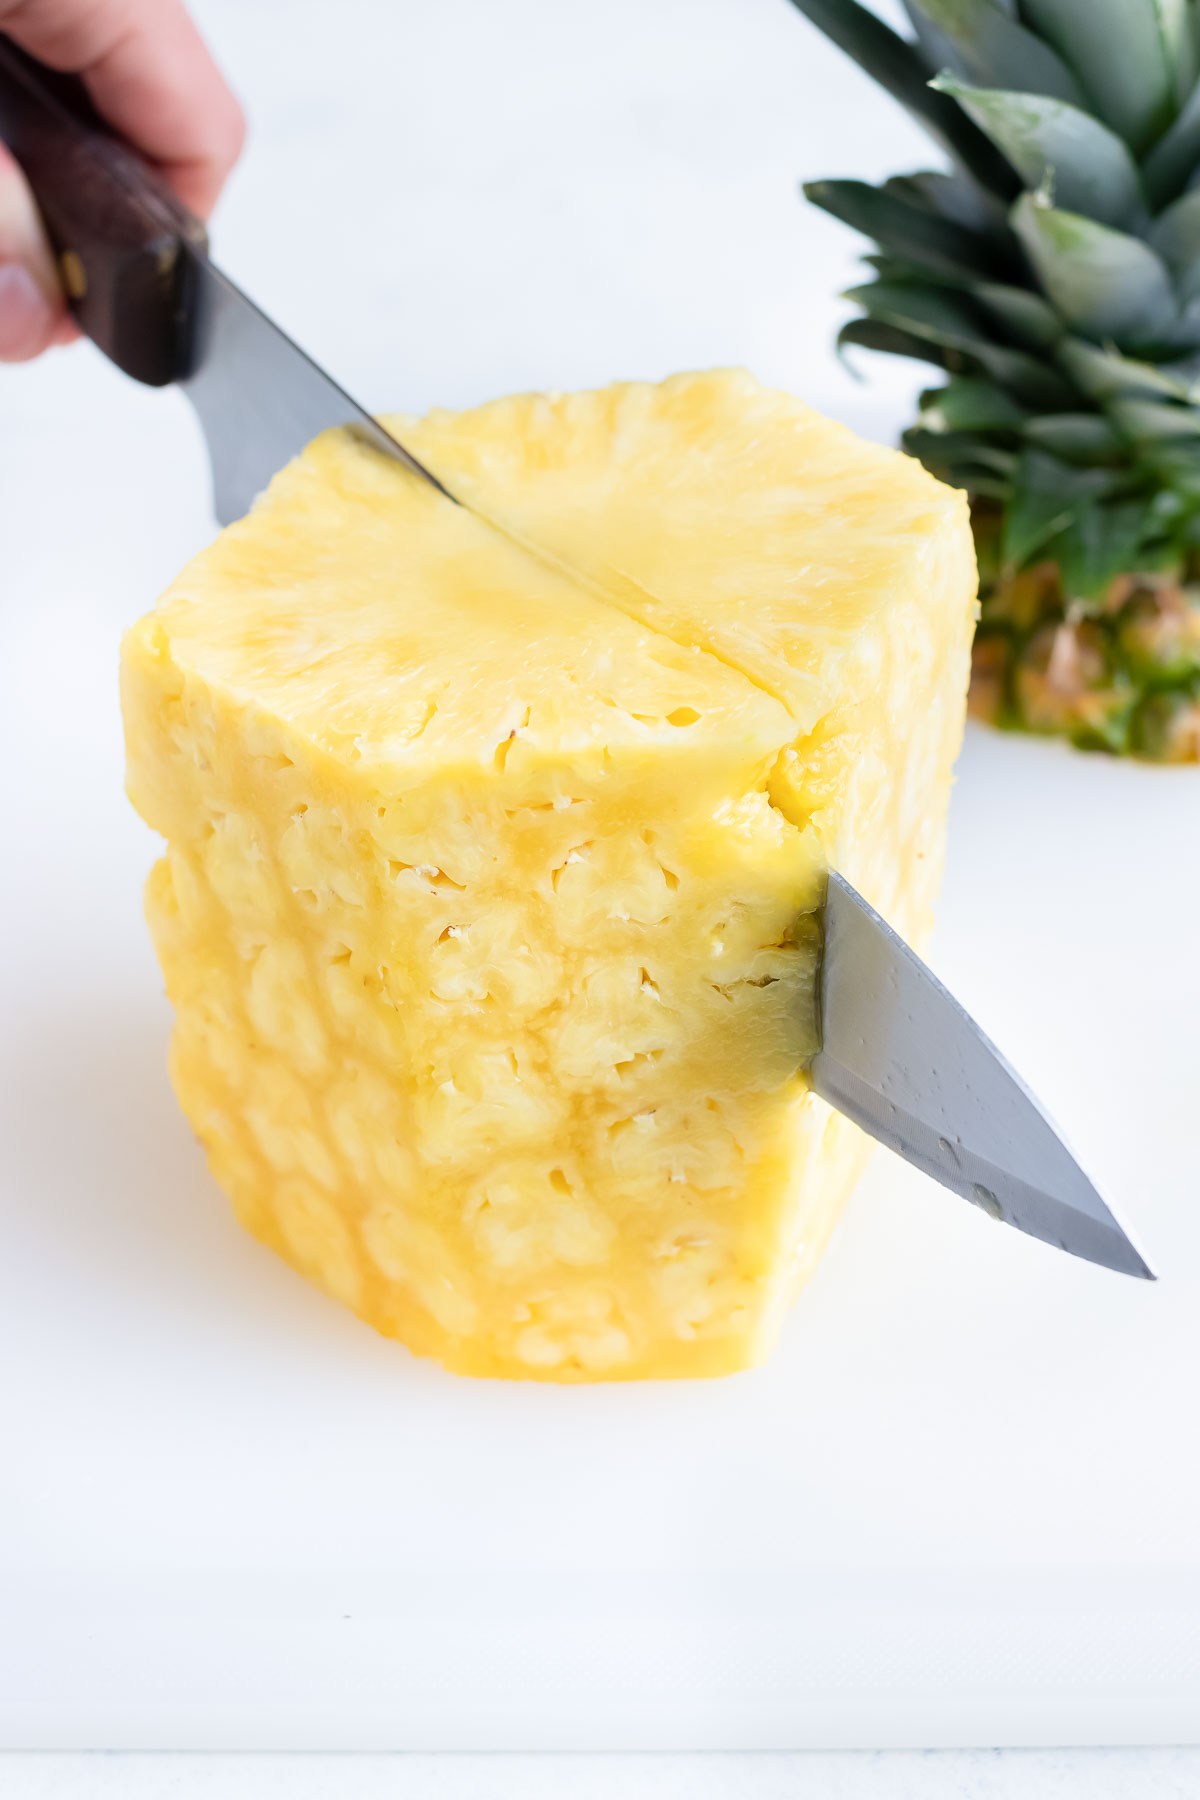 The whole pineapple is cut in half with a knife.